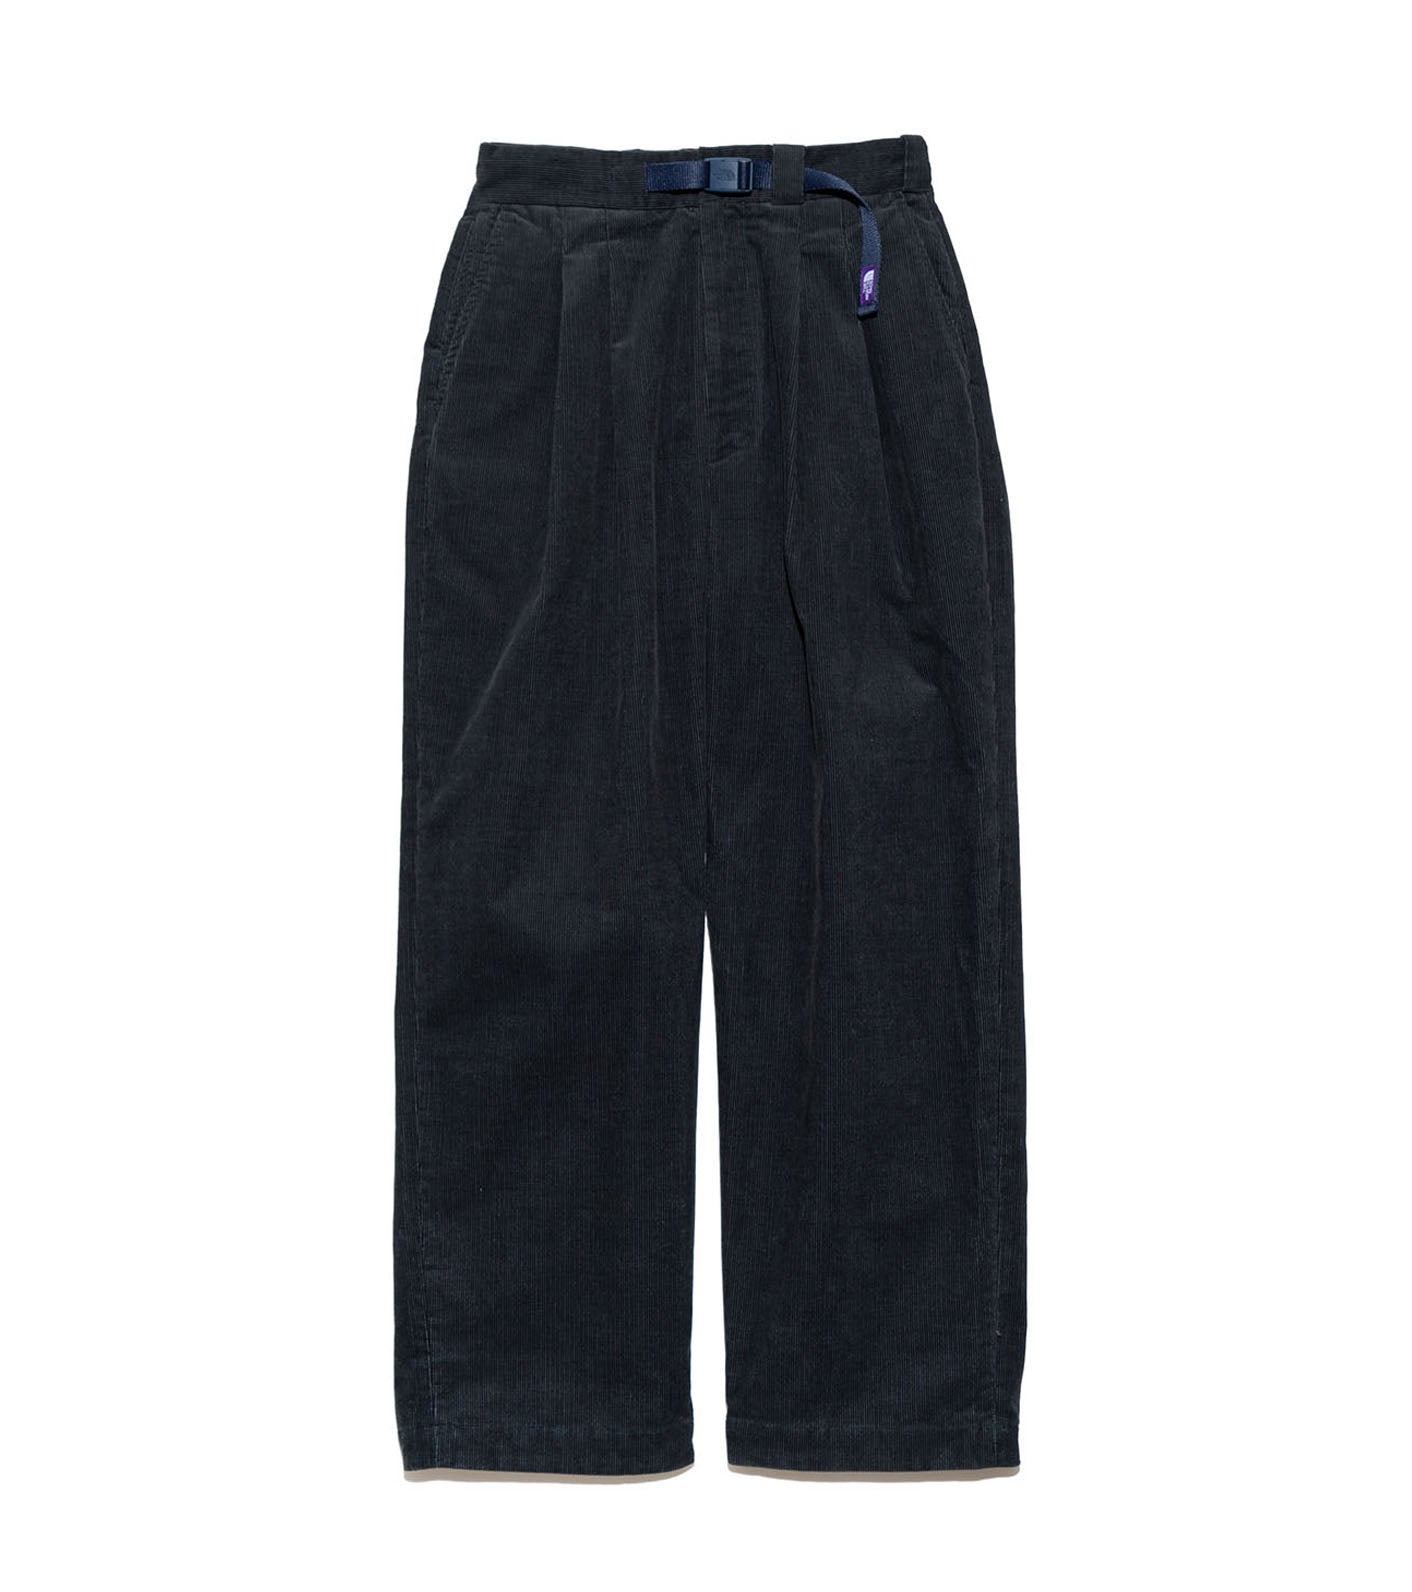 THE NORTH FACE PURPLE LABEL Corduroy Field Tuck Pants